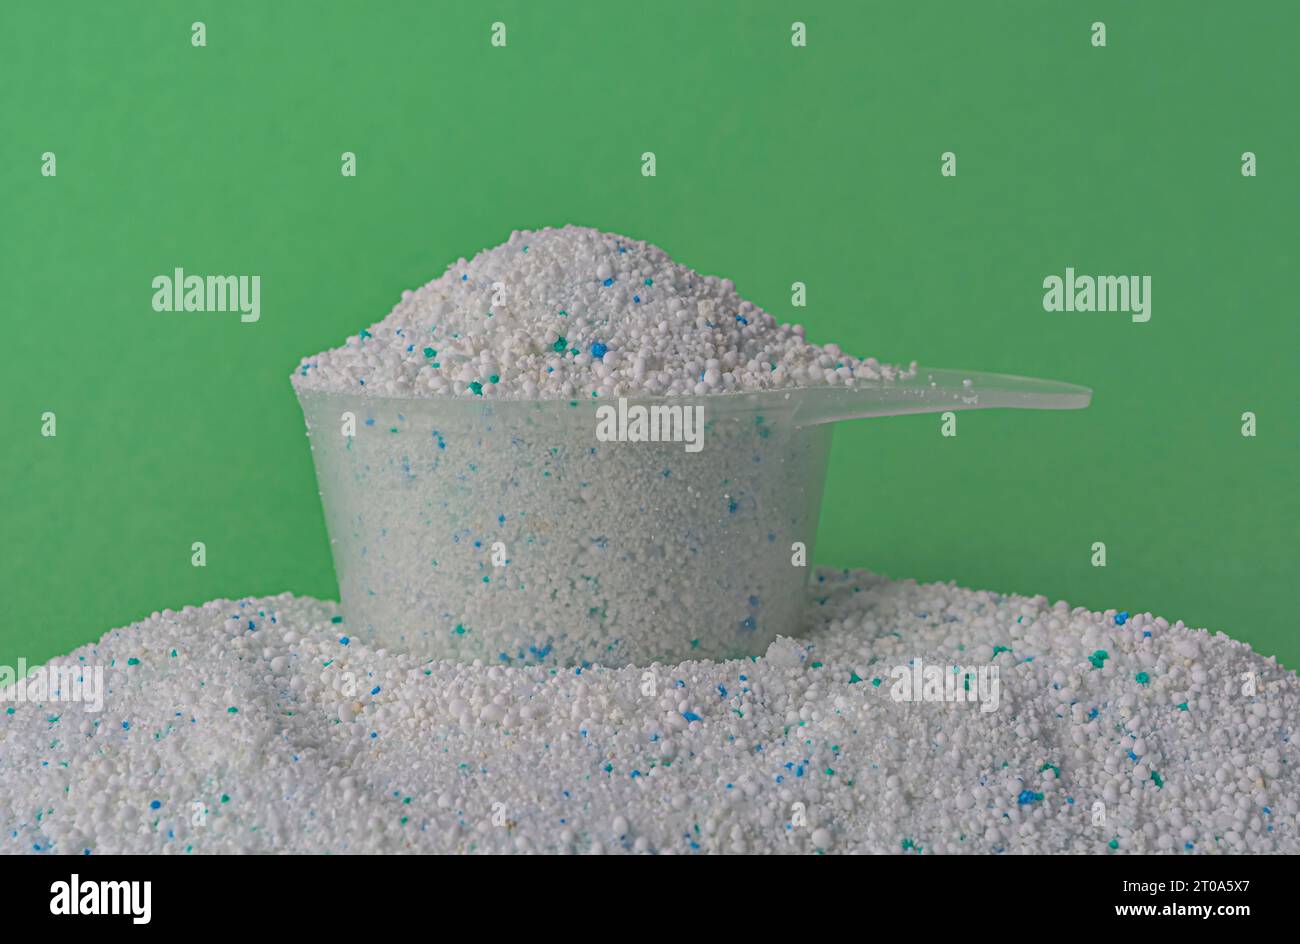 Laundry Detergent Powder and Blue Liquid Gel in Measuring Cup Stock Photo -  Image of equipment, dosing: 142281028